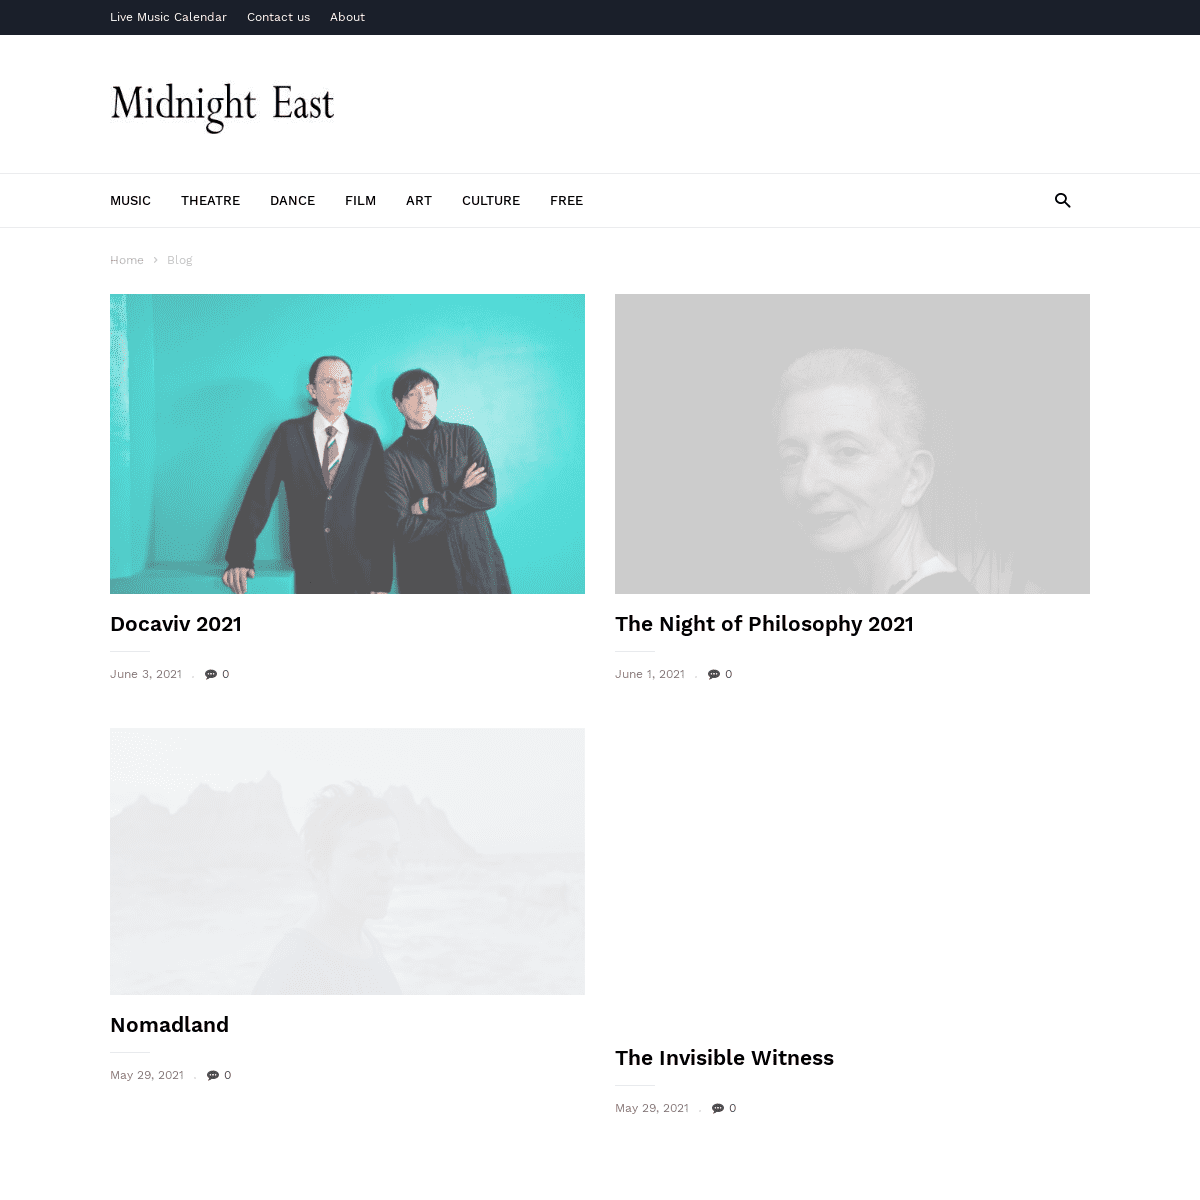 A complete backup of https://midnighteast.com